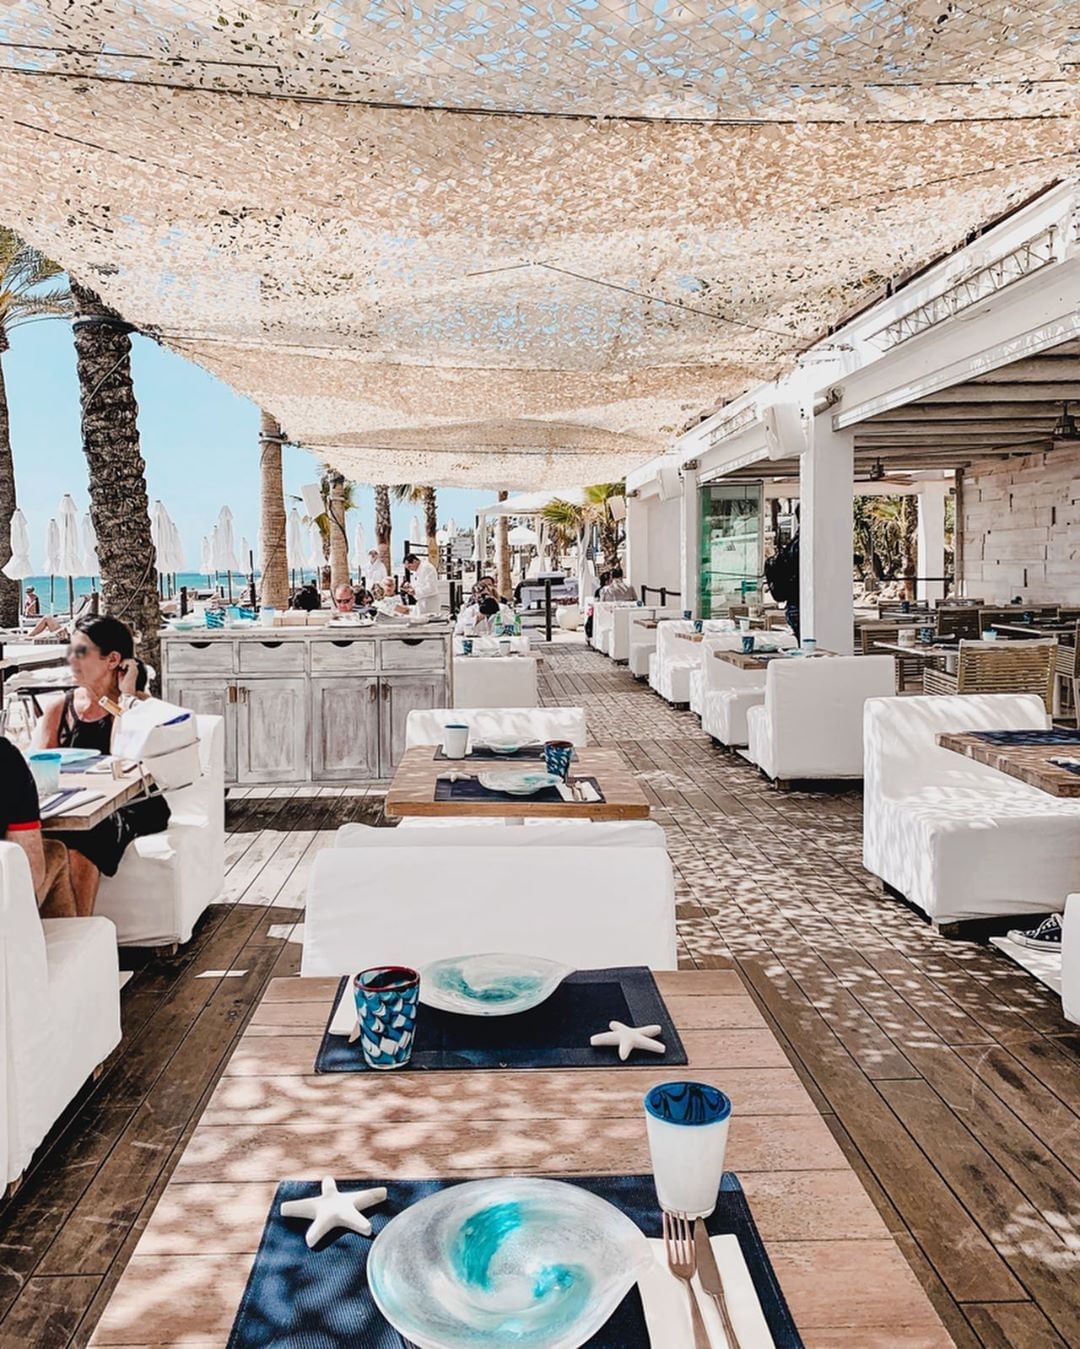 Here’s to the new season!⁠
⁠
The countdown is over, @AmareHotels’ #AmareMarbella re-opens today for the 2020 season. ⁠
⁠
📸 @amarebeachrestaurant